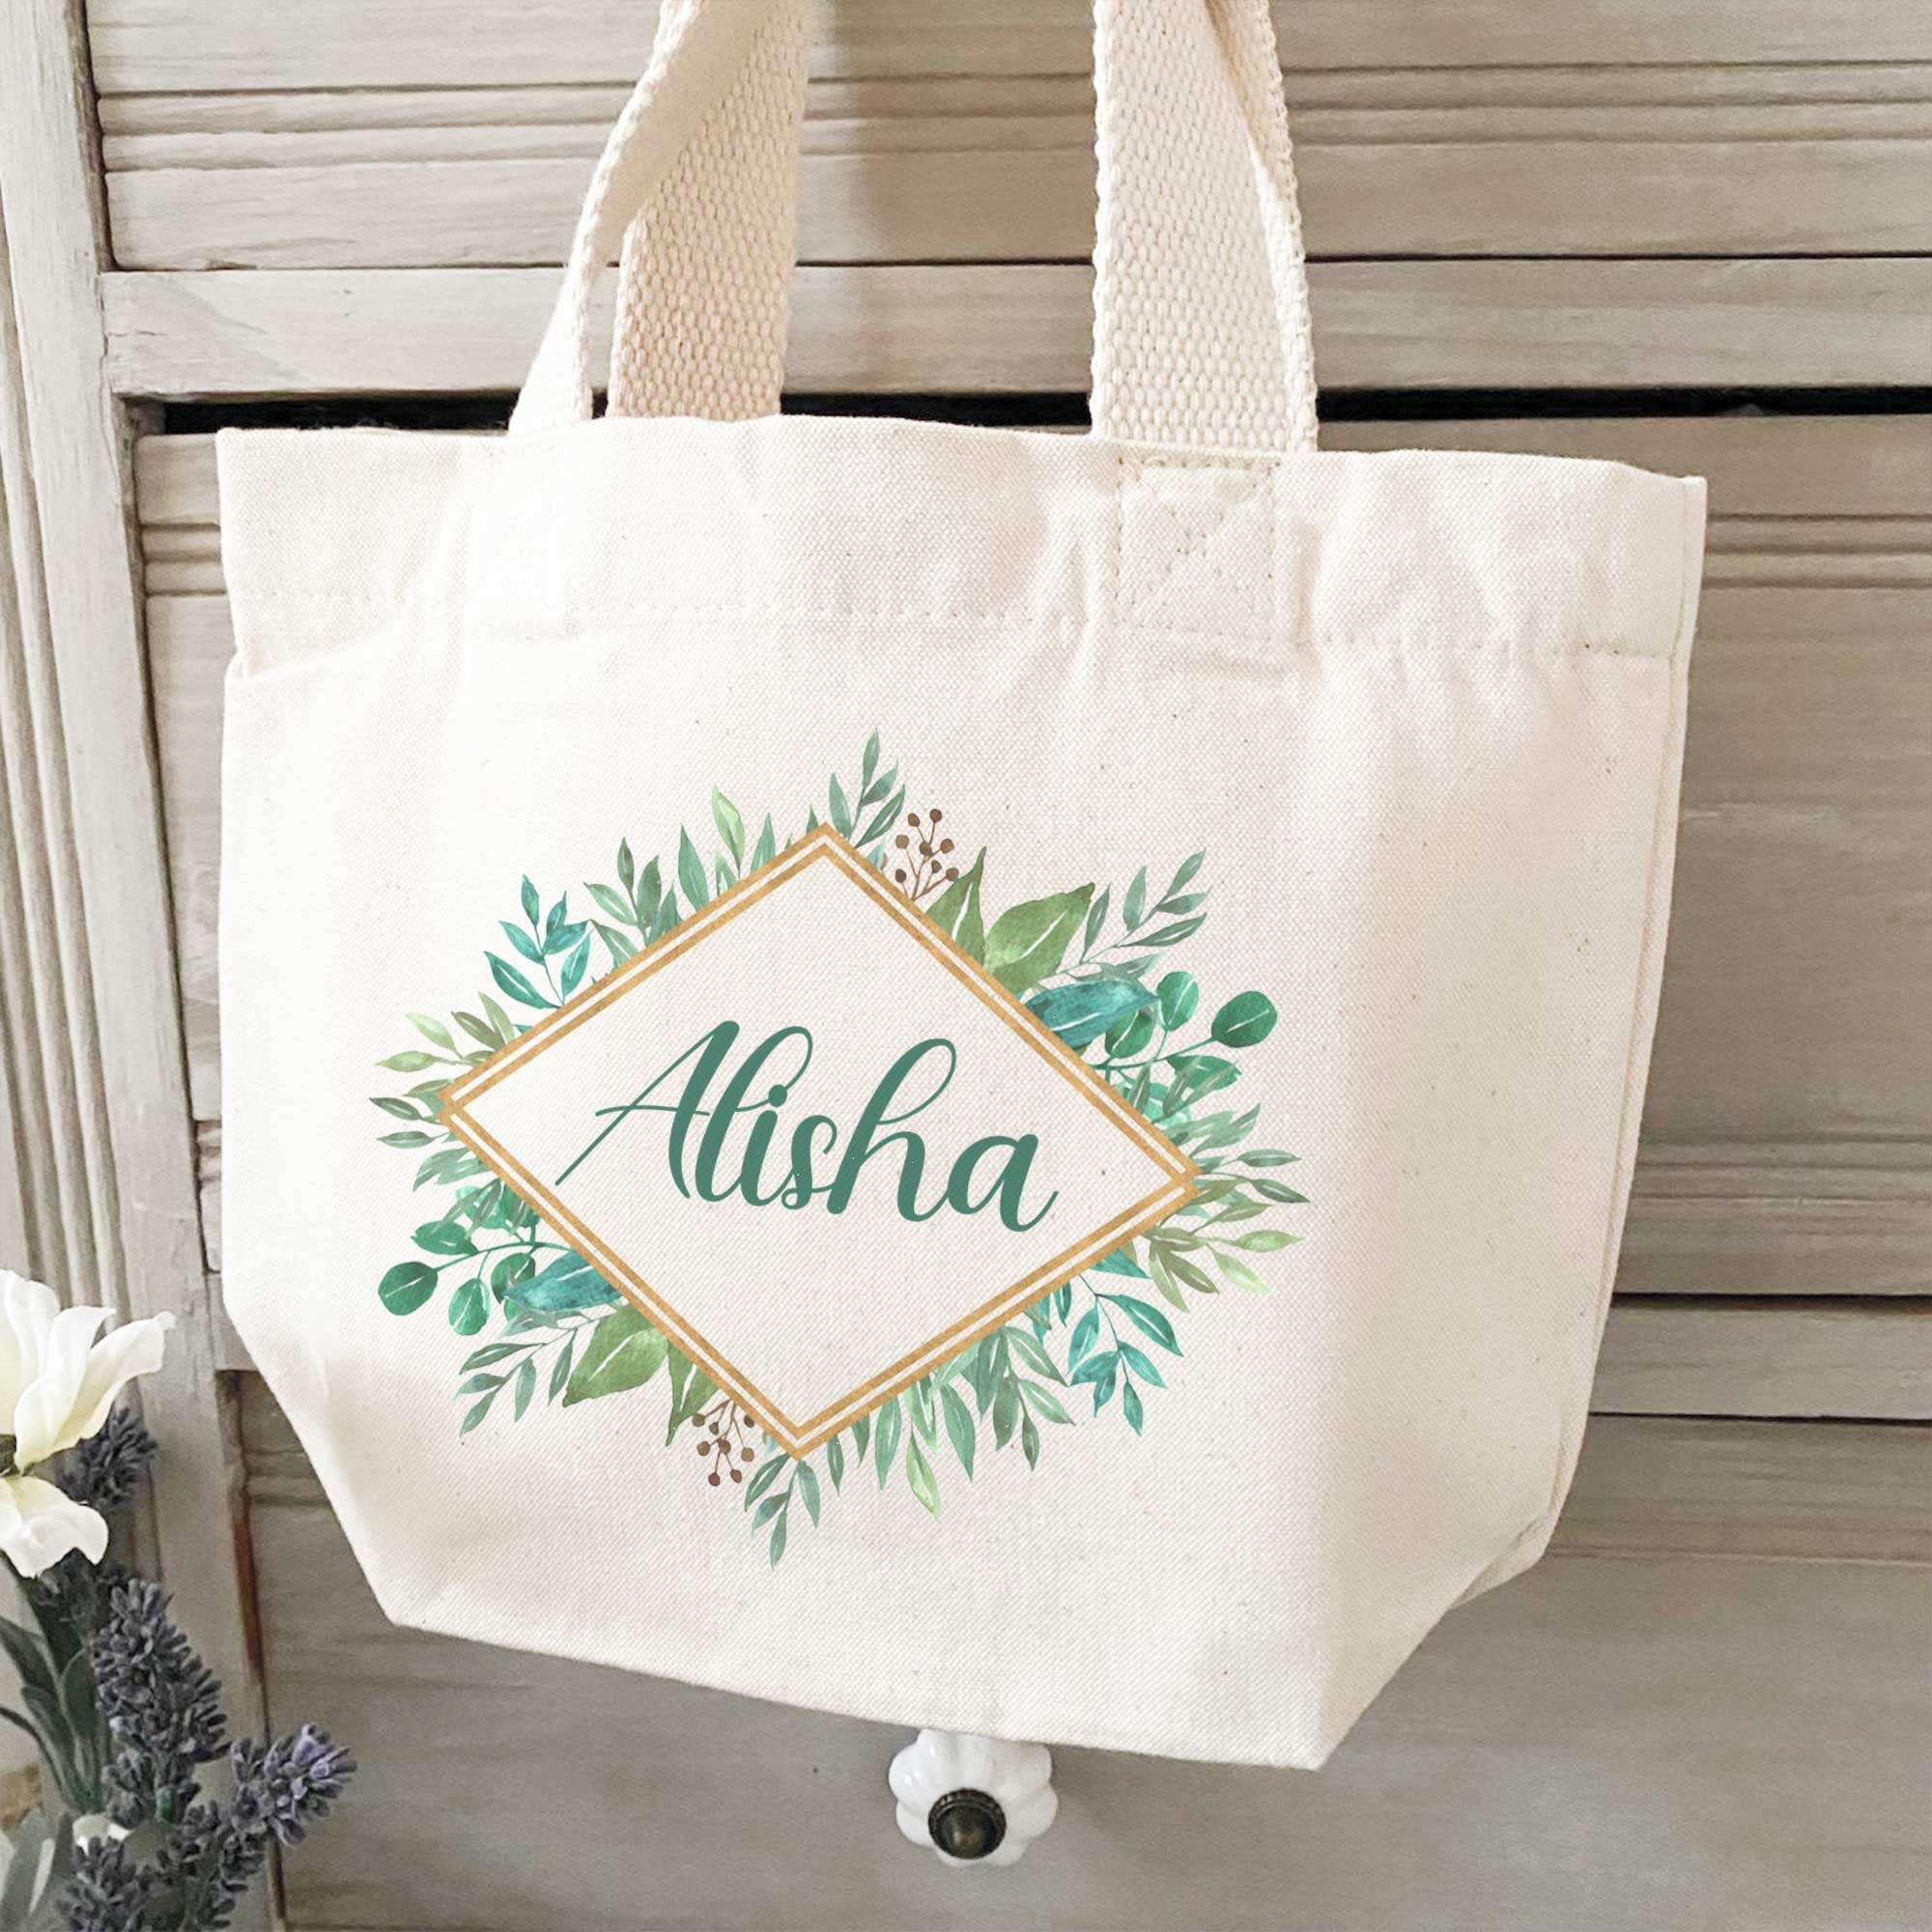 Personalized Name with Vine Cotton Canvas Tote Bag – The Cotton